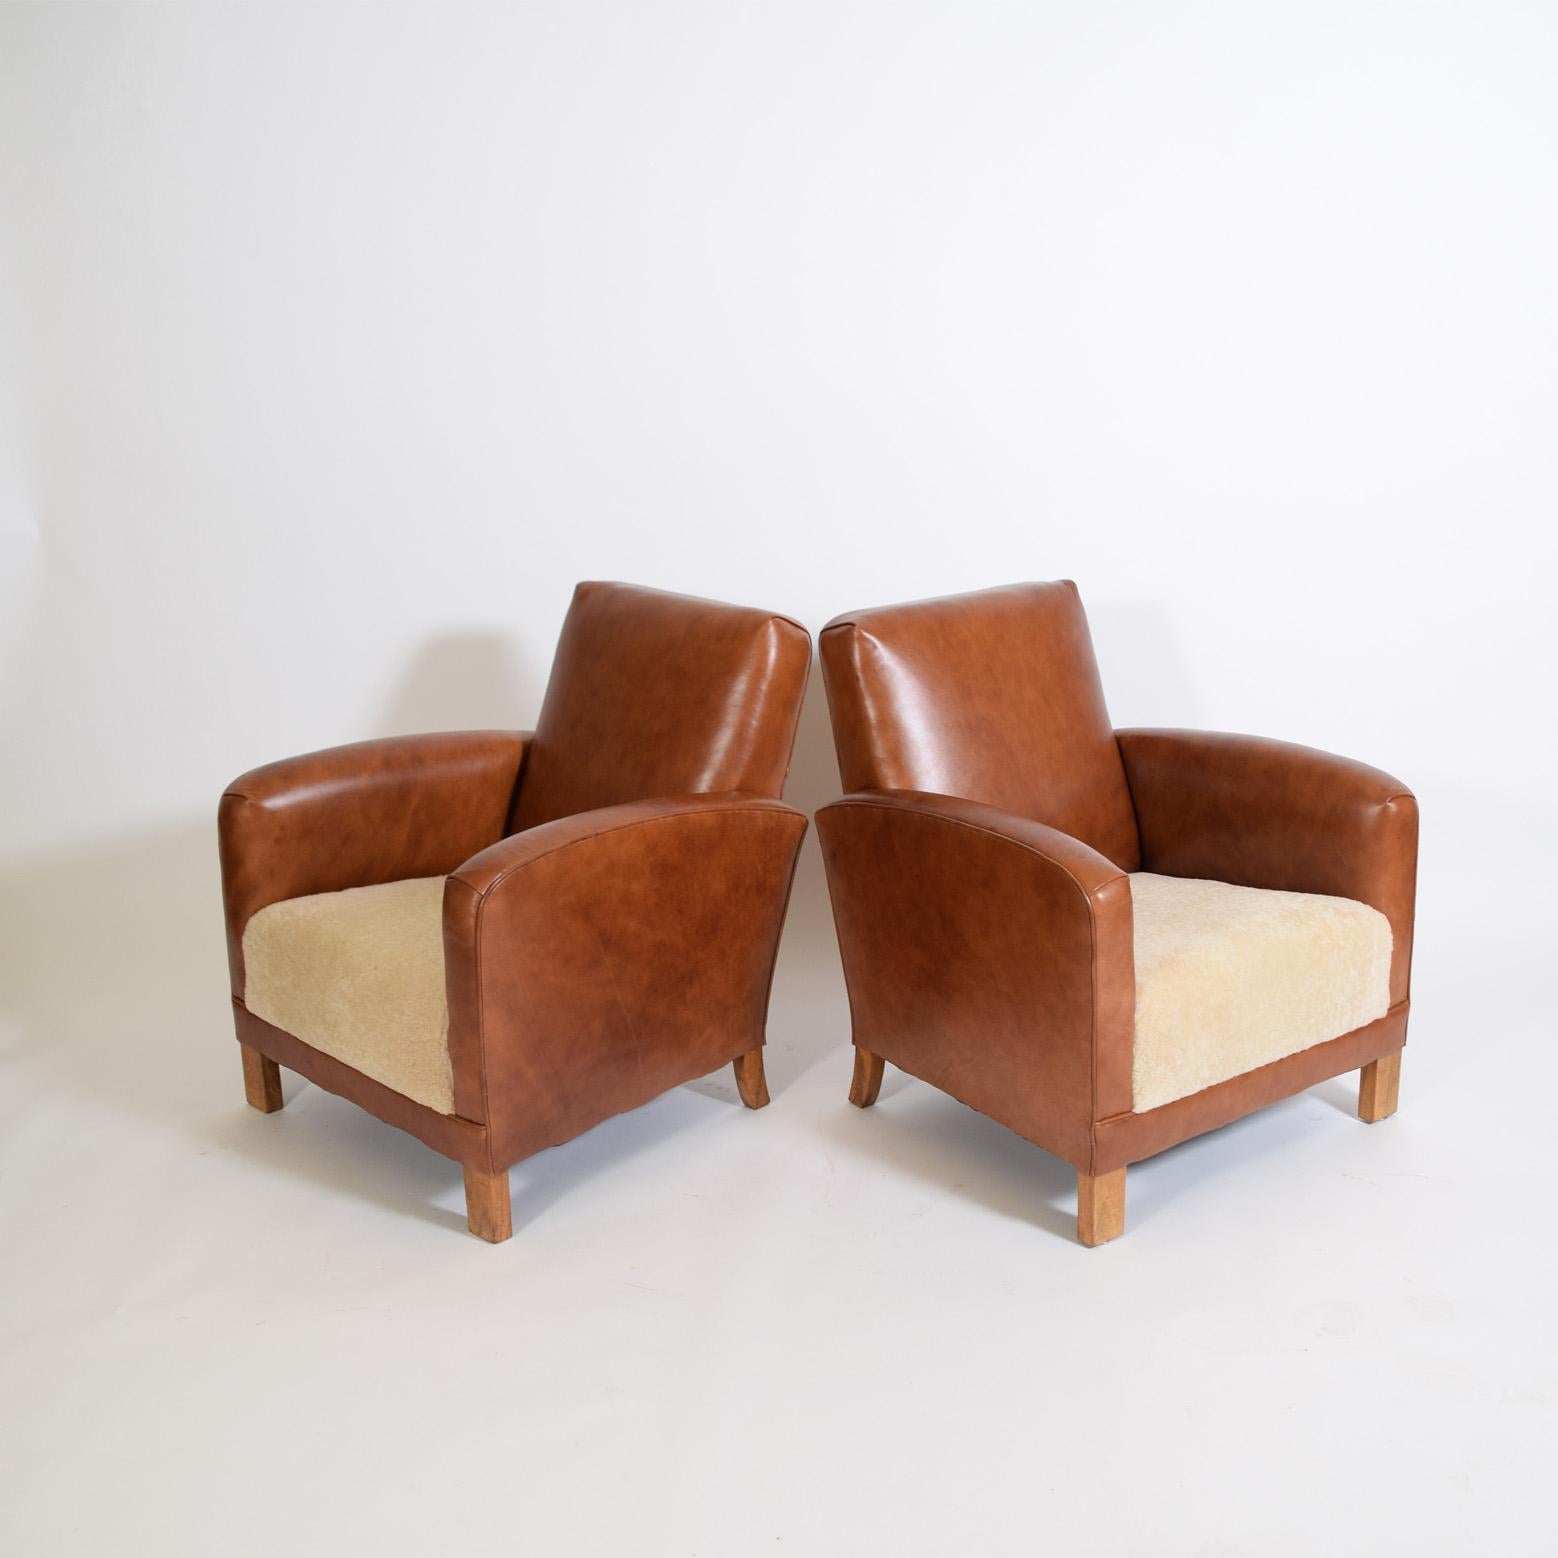 Mid-20th Century Danish Art Deco Lounge Chairs 1930's For Sale